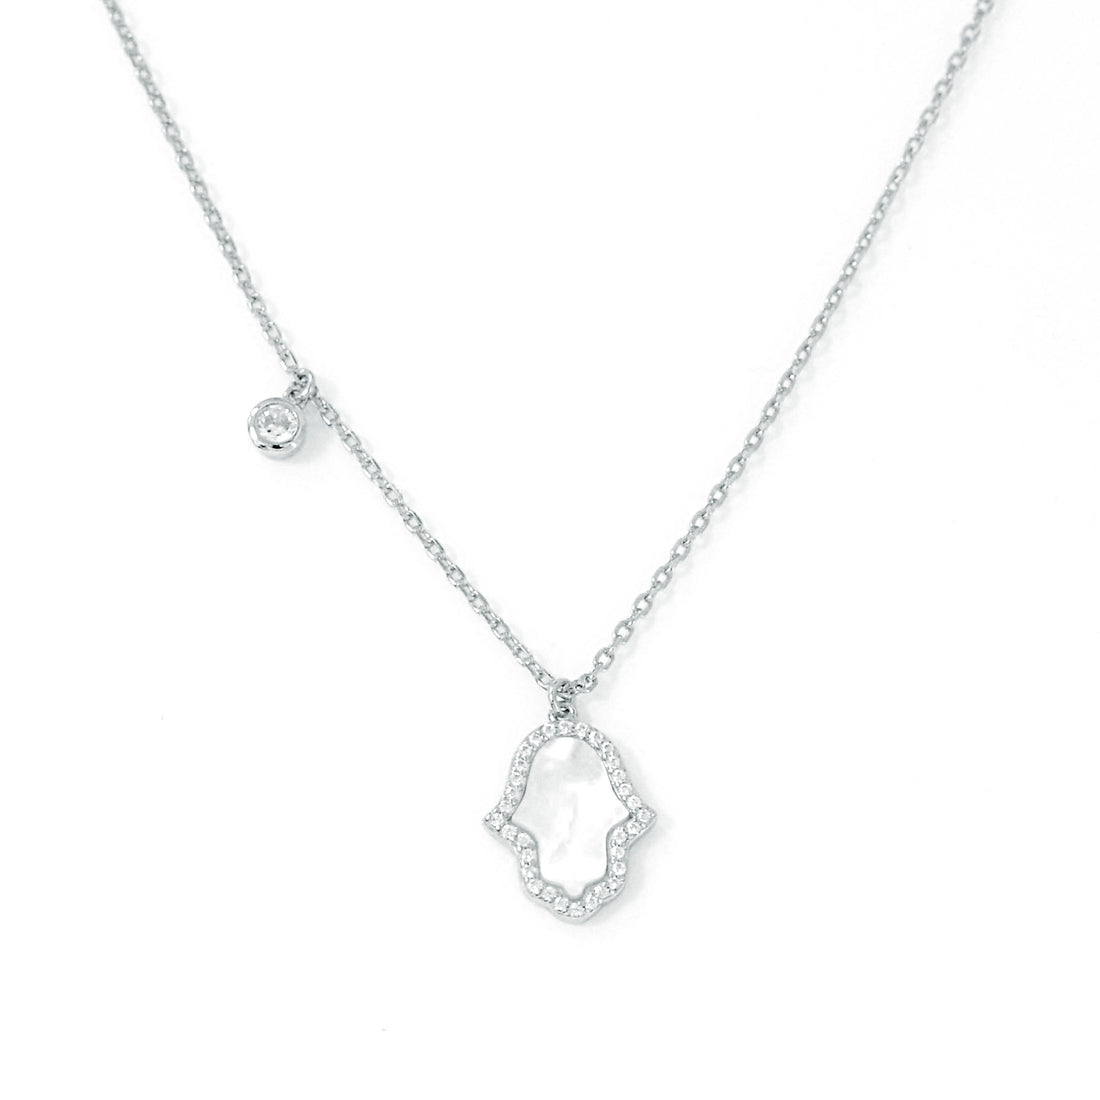 Exquisite Silver Necklace with Hand-Shaped Mother of Pearl Pendant and High-Quality Cubic Zircons